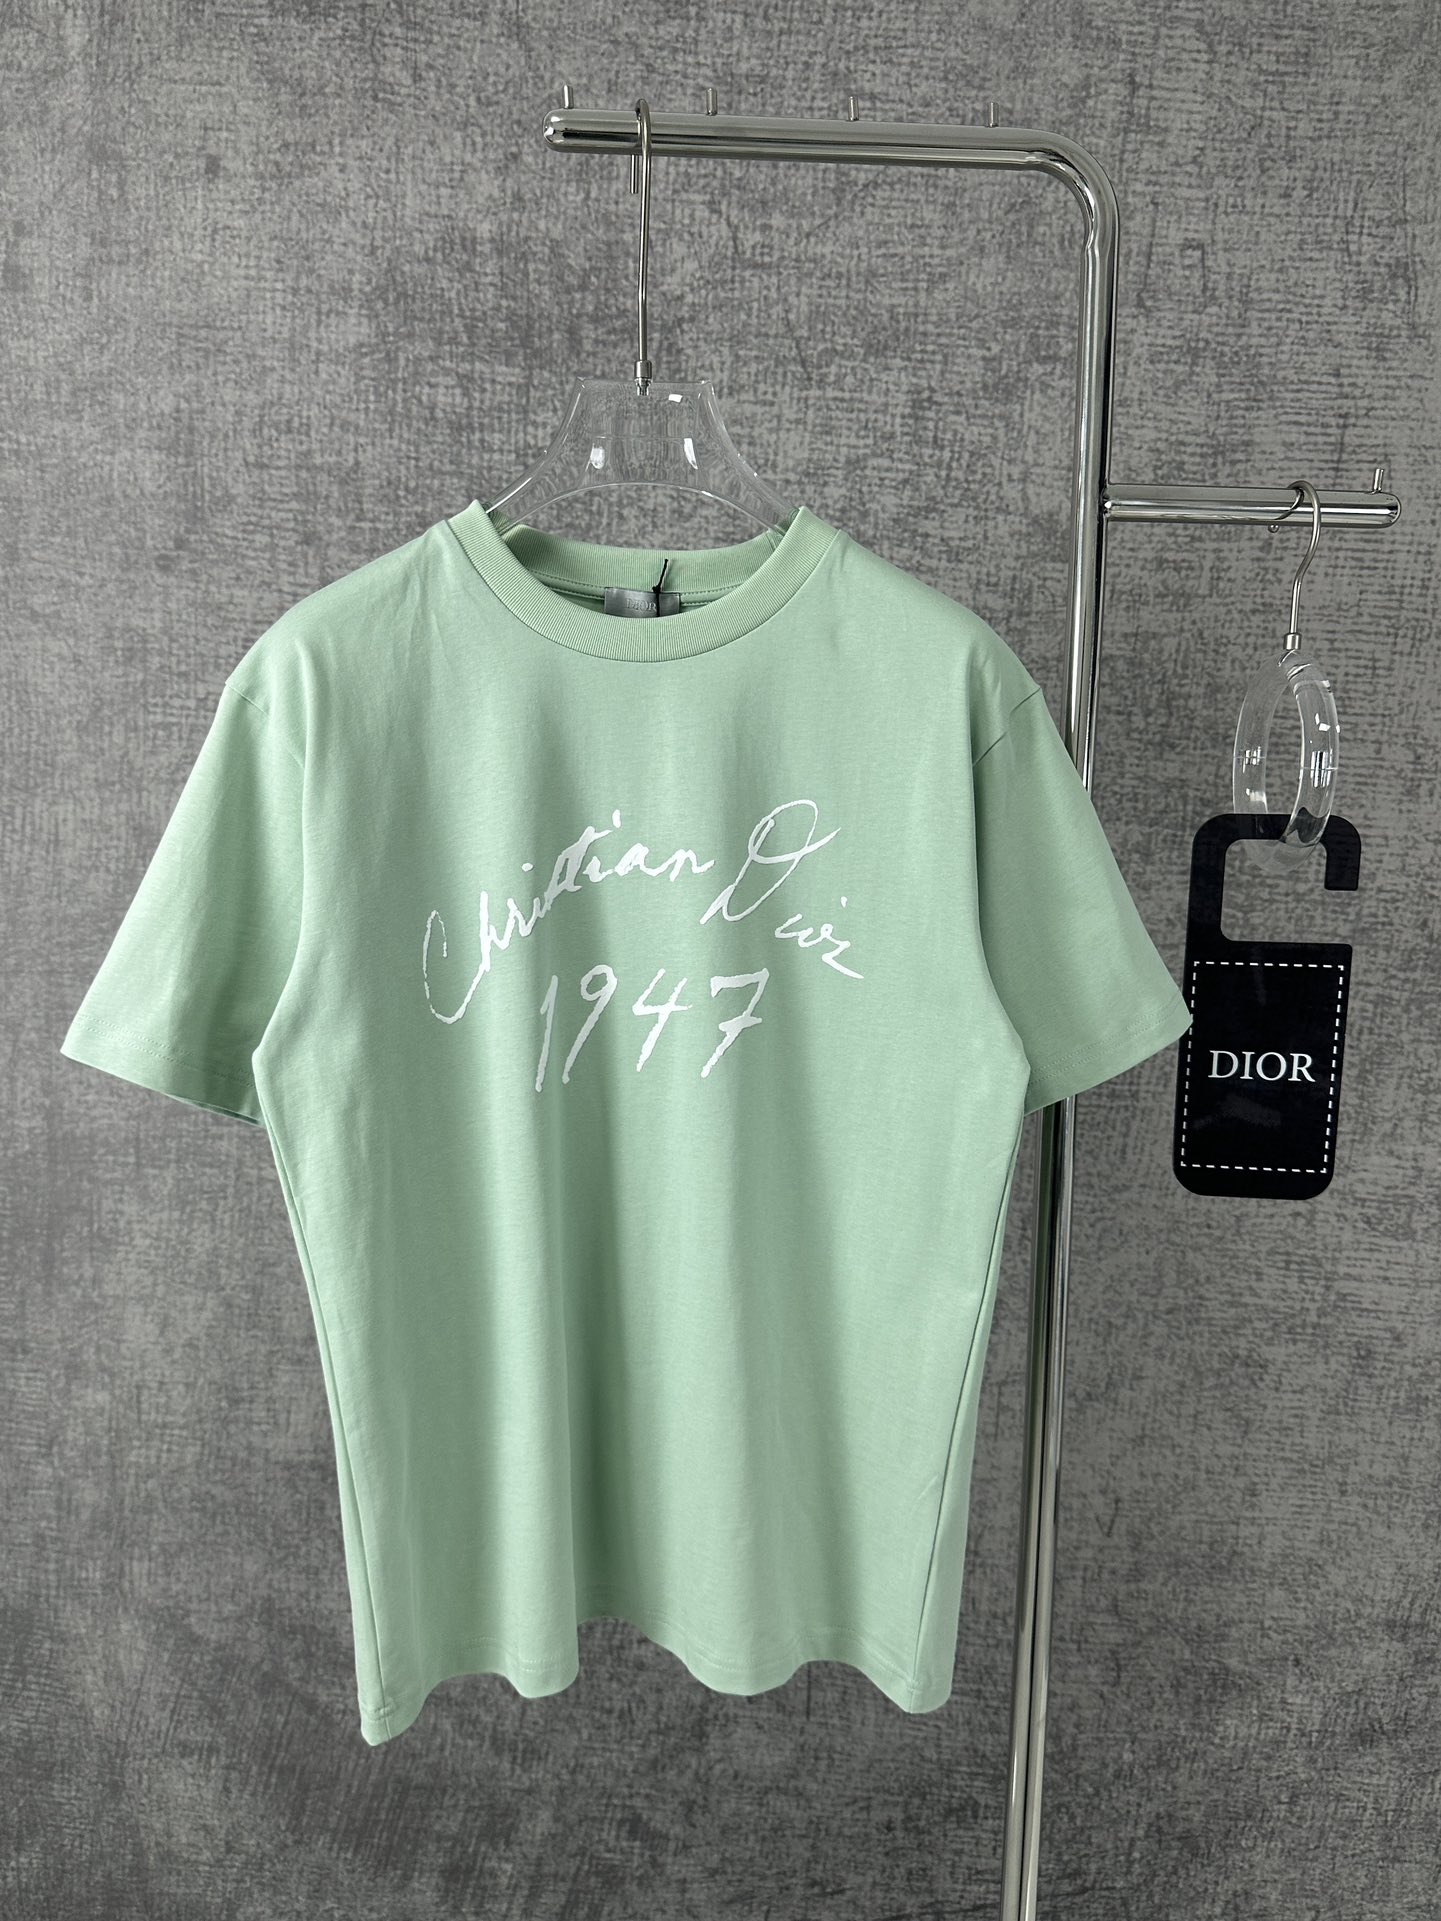 Dior Clothing T-Shirt Black Green White Printing Unisex Cotton Knitting Summer Collection 1947 Short Sleeve